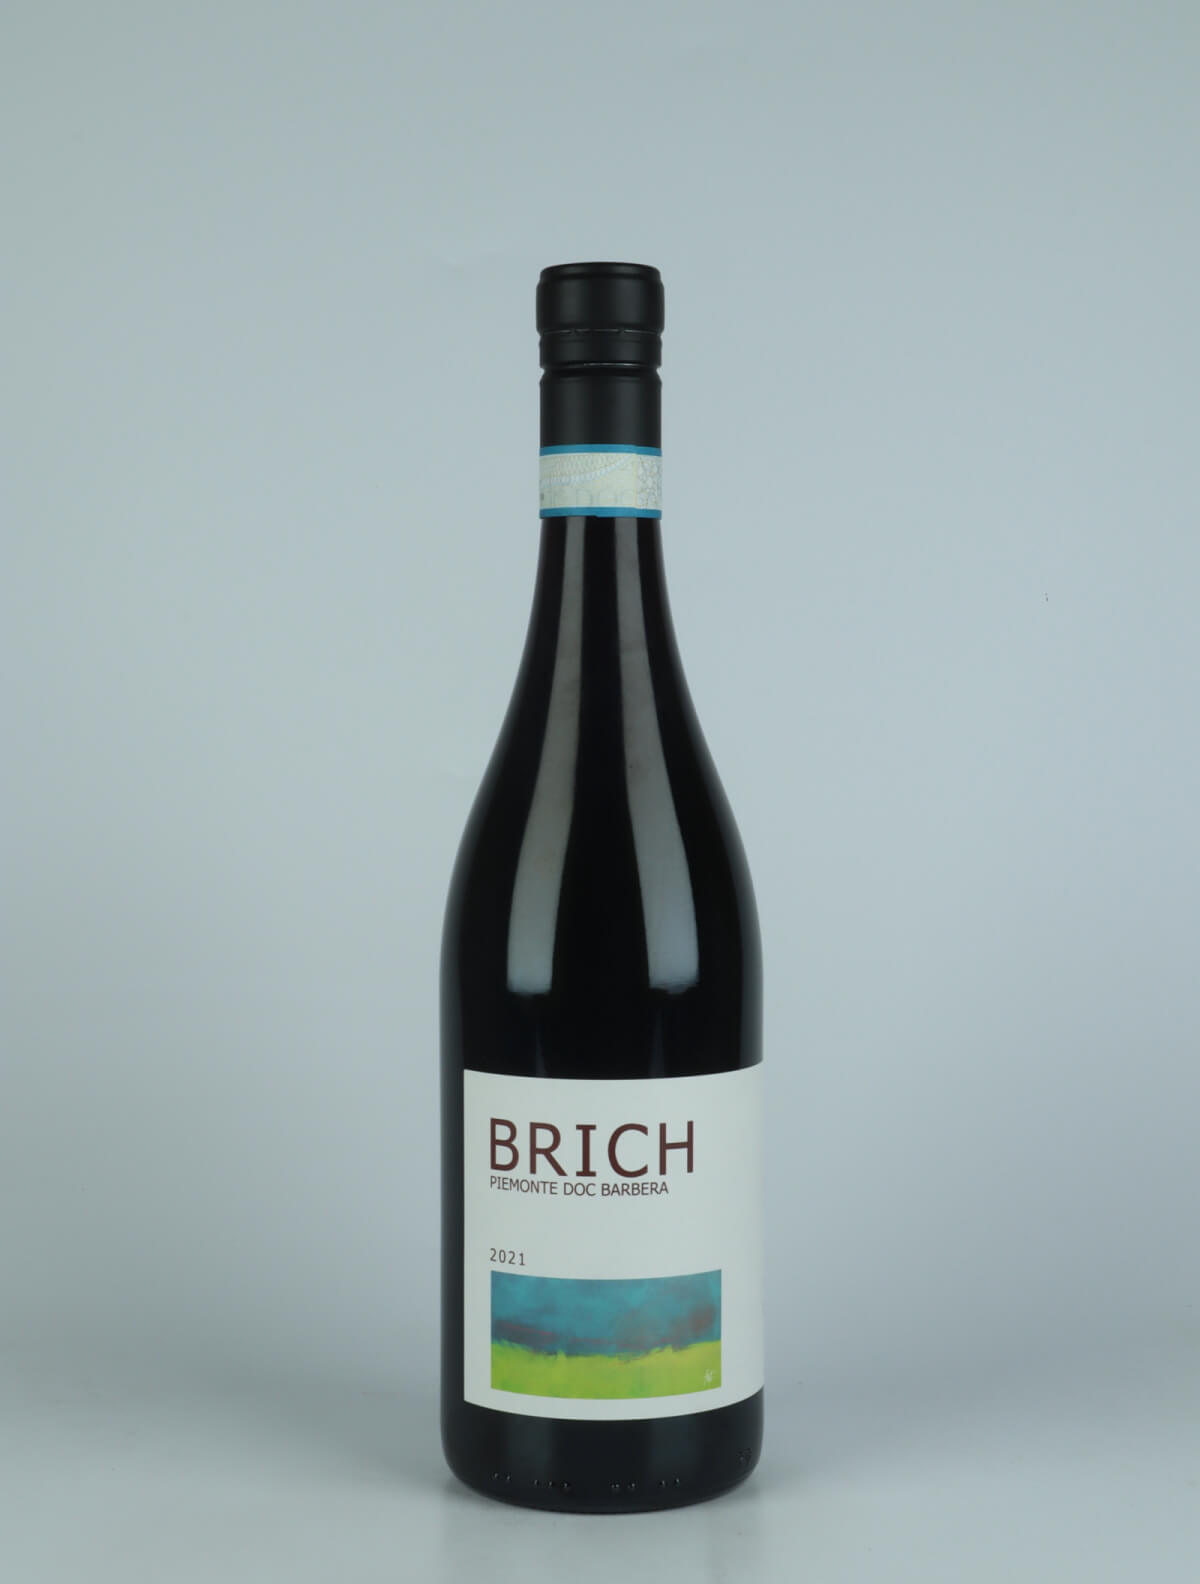 A bottle 2021 Barbera - Brich Red wine from Agricola Gaia, Piedmont in Italy